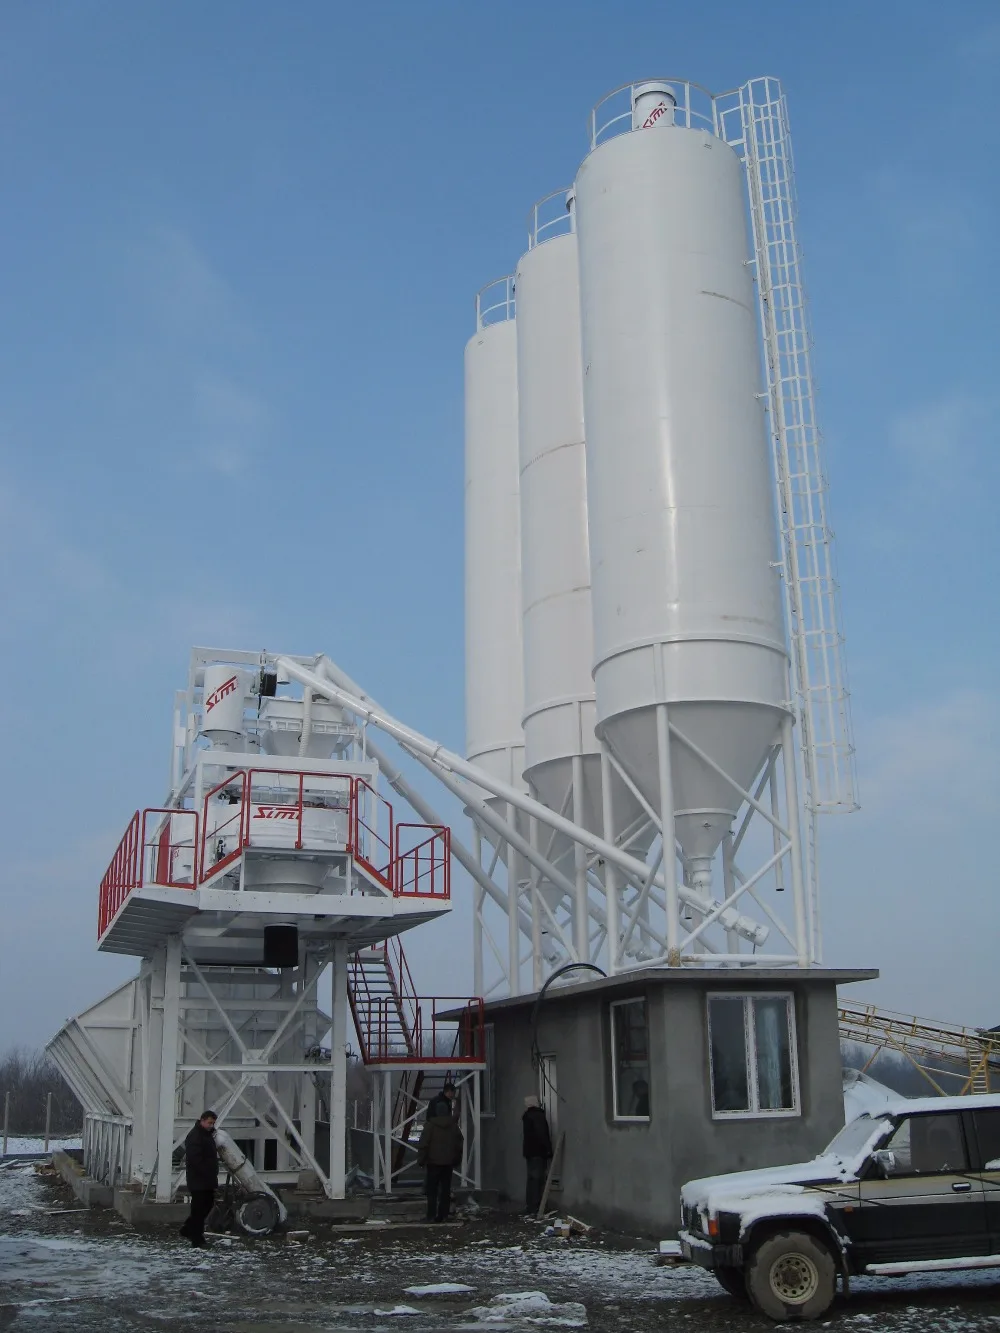 New Design Holding Silos For Cement Storage - Buy Holding Silos,Silos